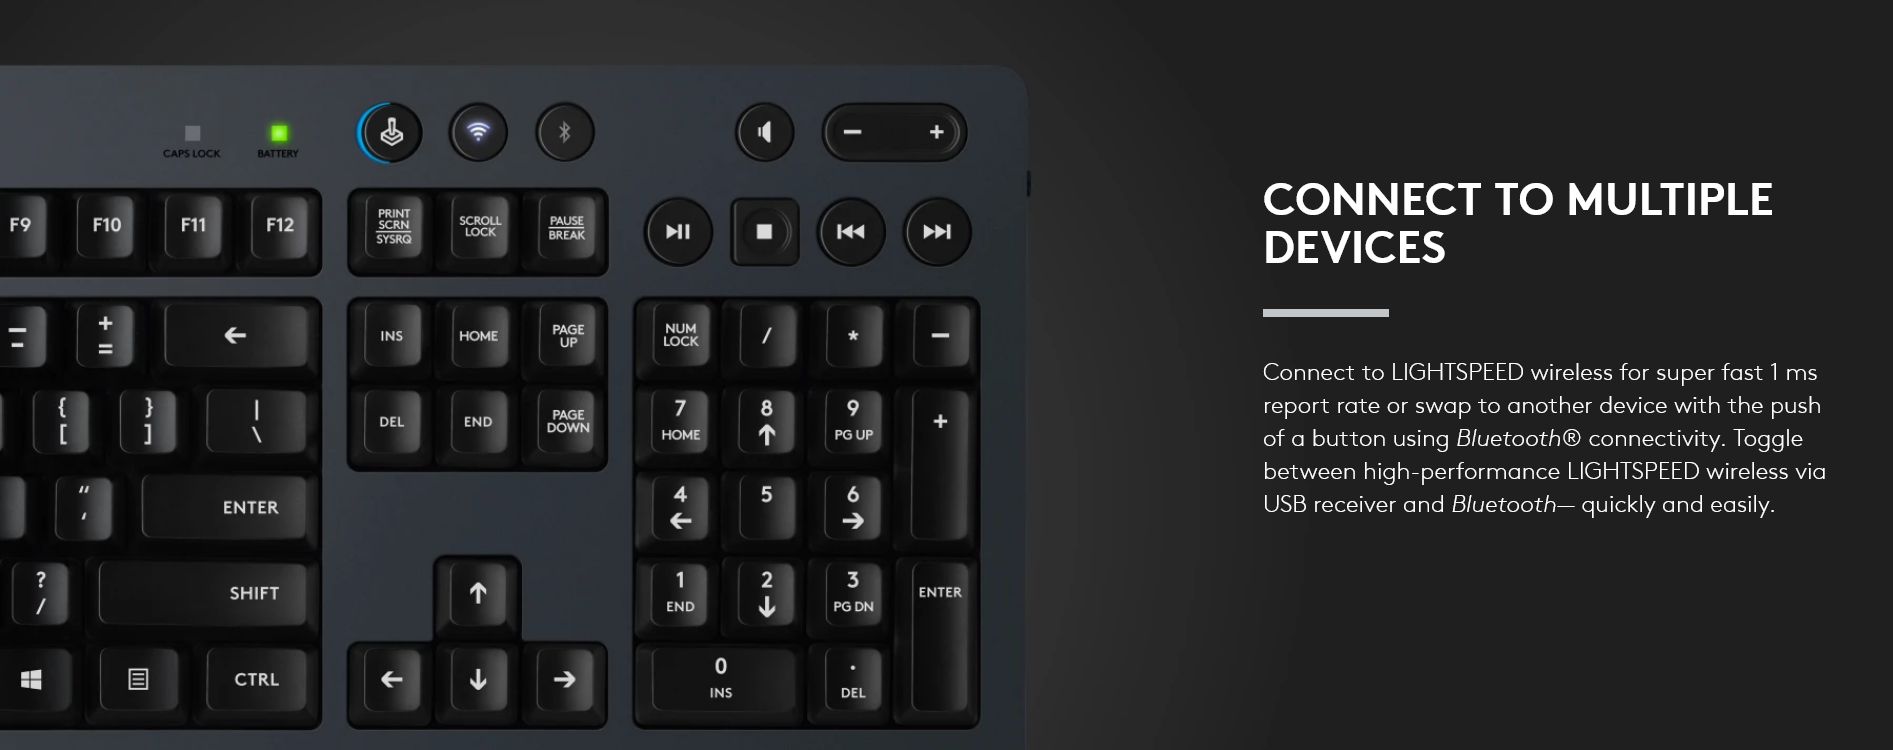 Logitech G613 Wireless Keyboard 920-008402 Connect to Multiple Devices